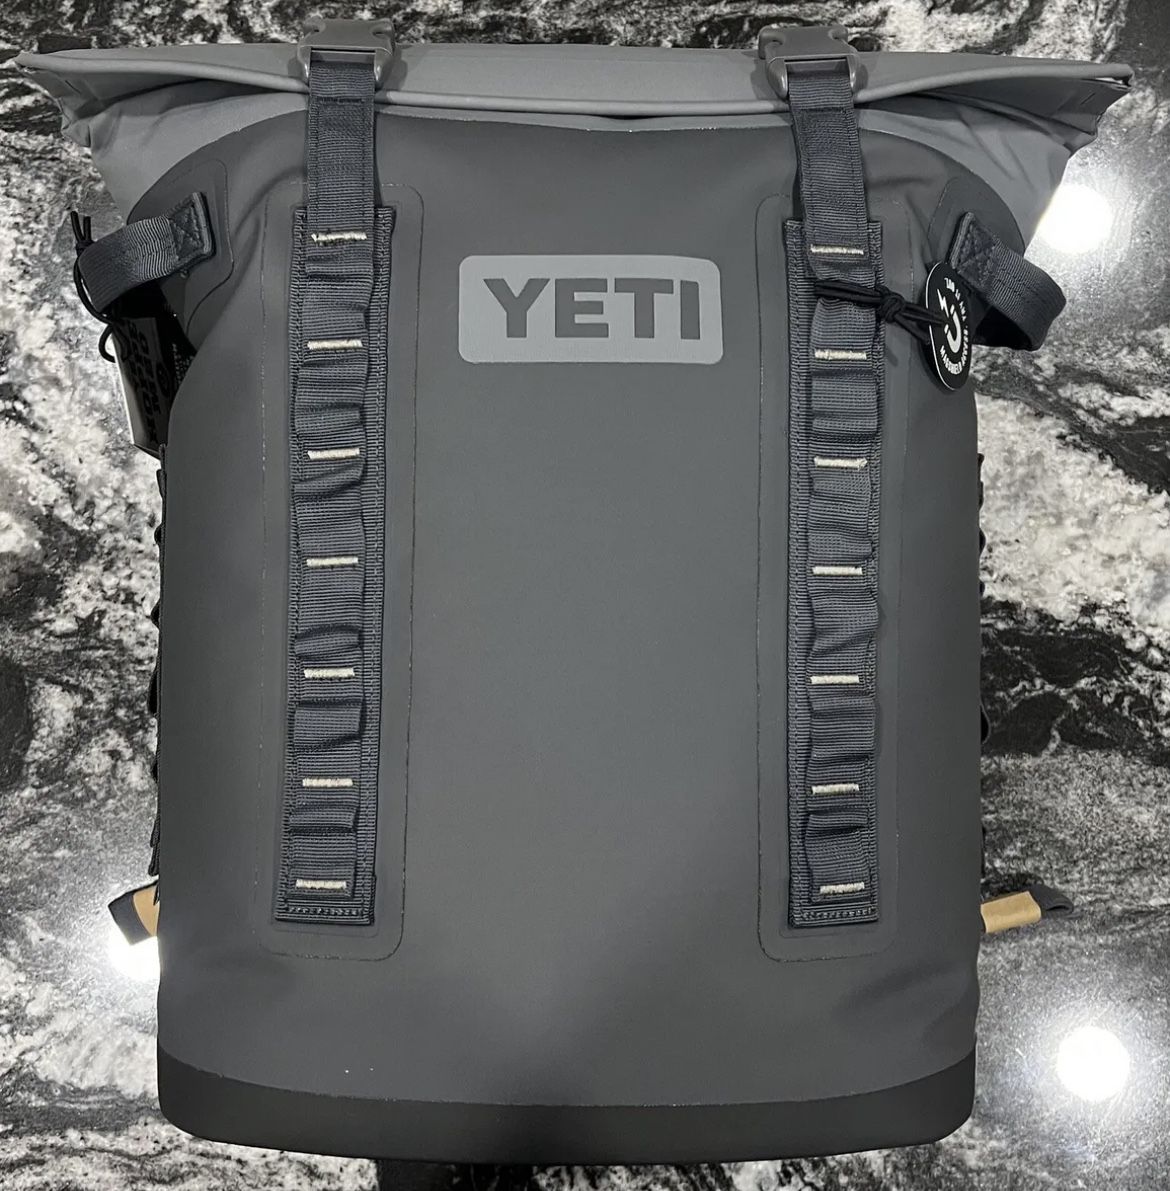 YET 7.2 gal Soft Sided Cooler, Charcoal Gray and Black 